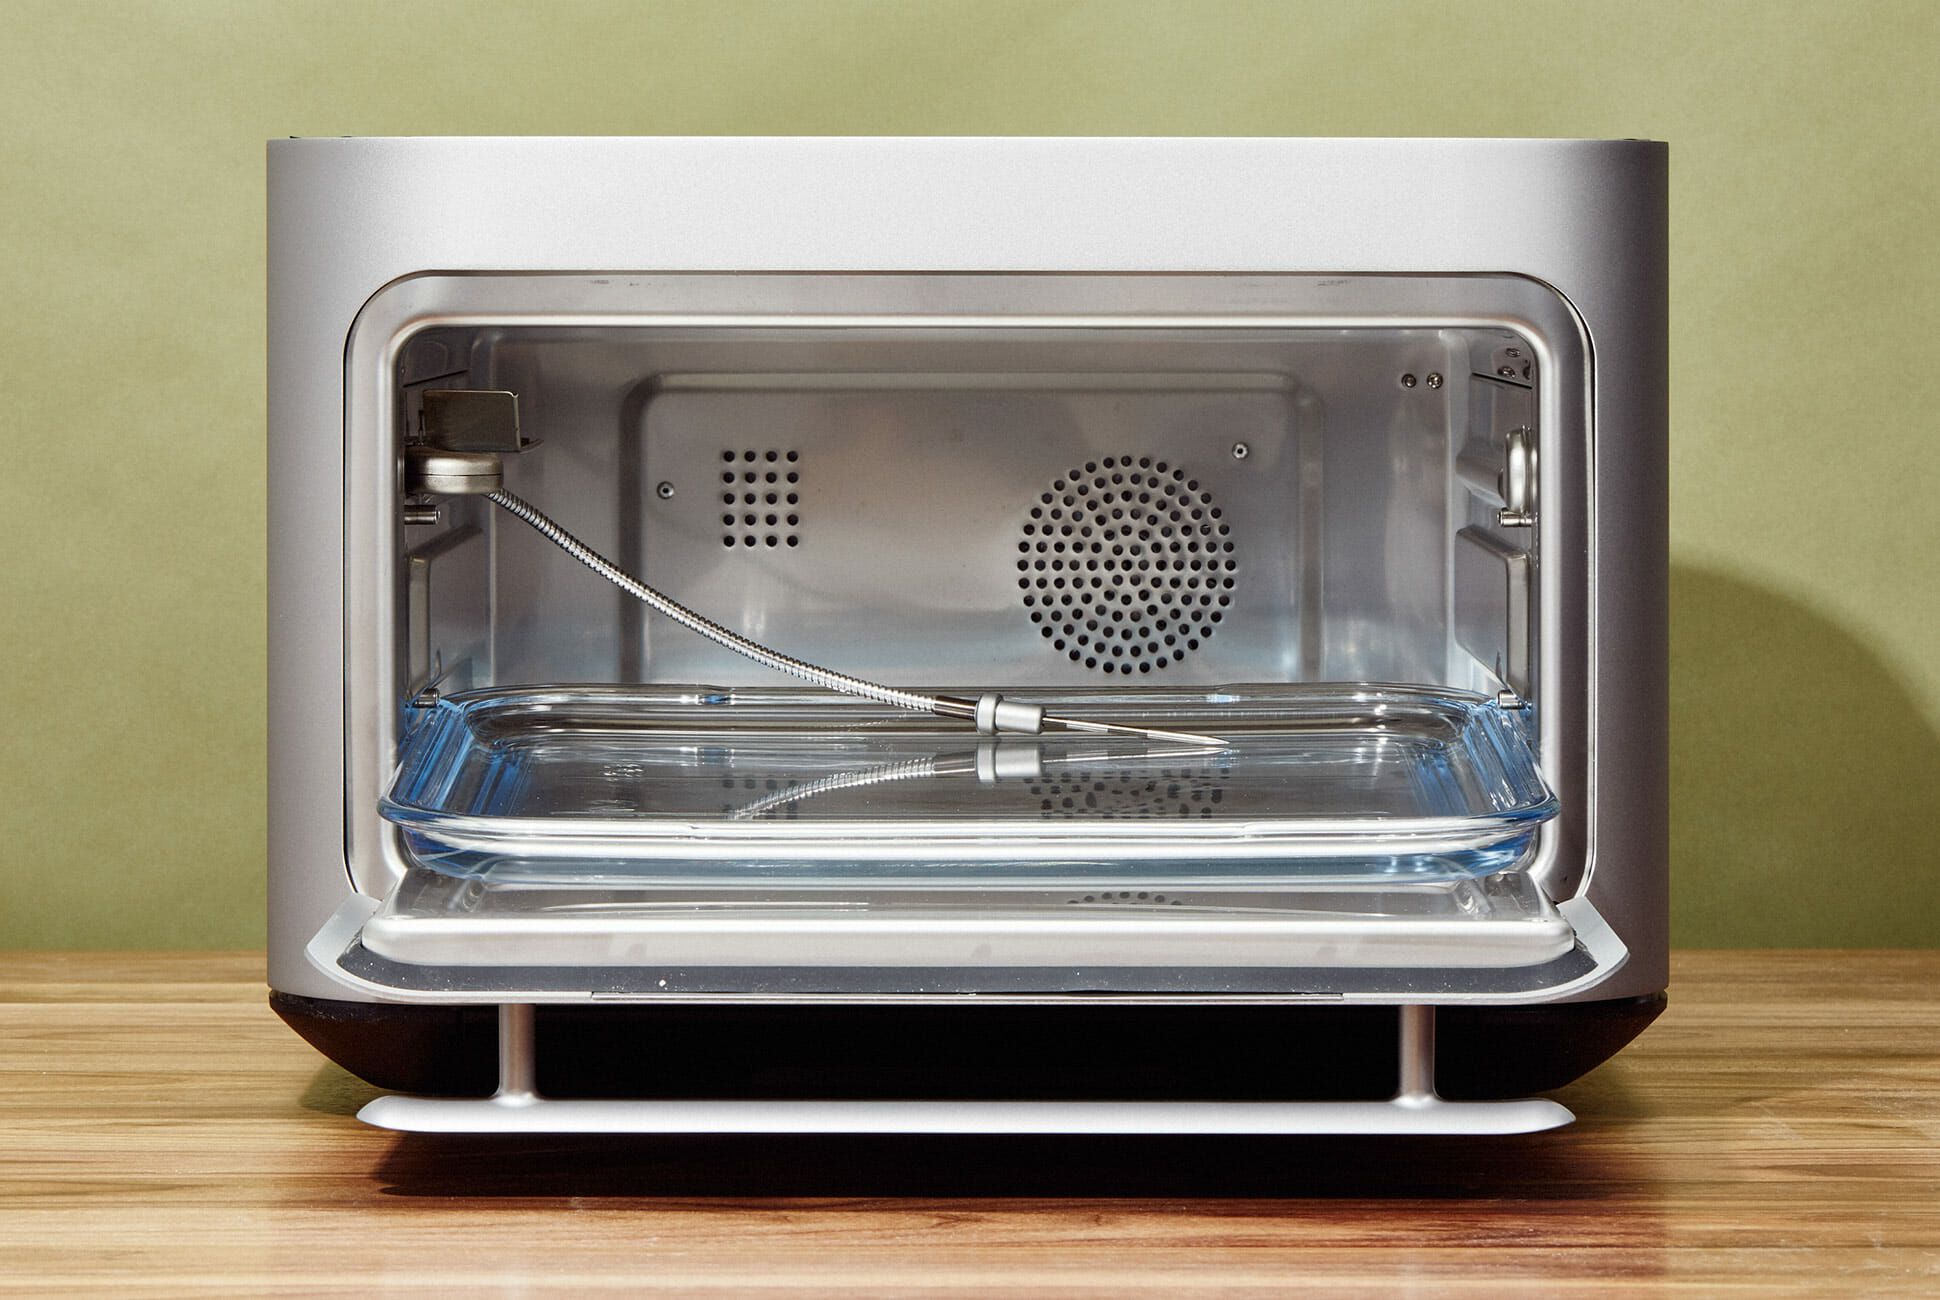 Brava Smart Oven Review: Meet the Oven That Cooks With Pure Light